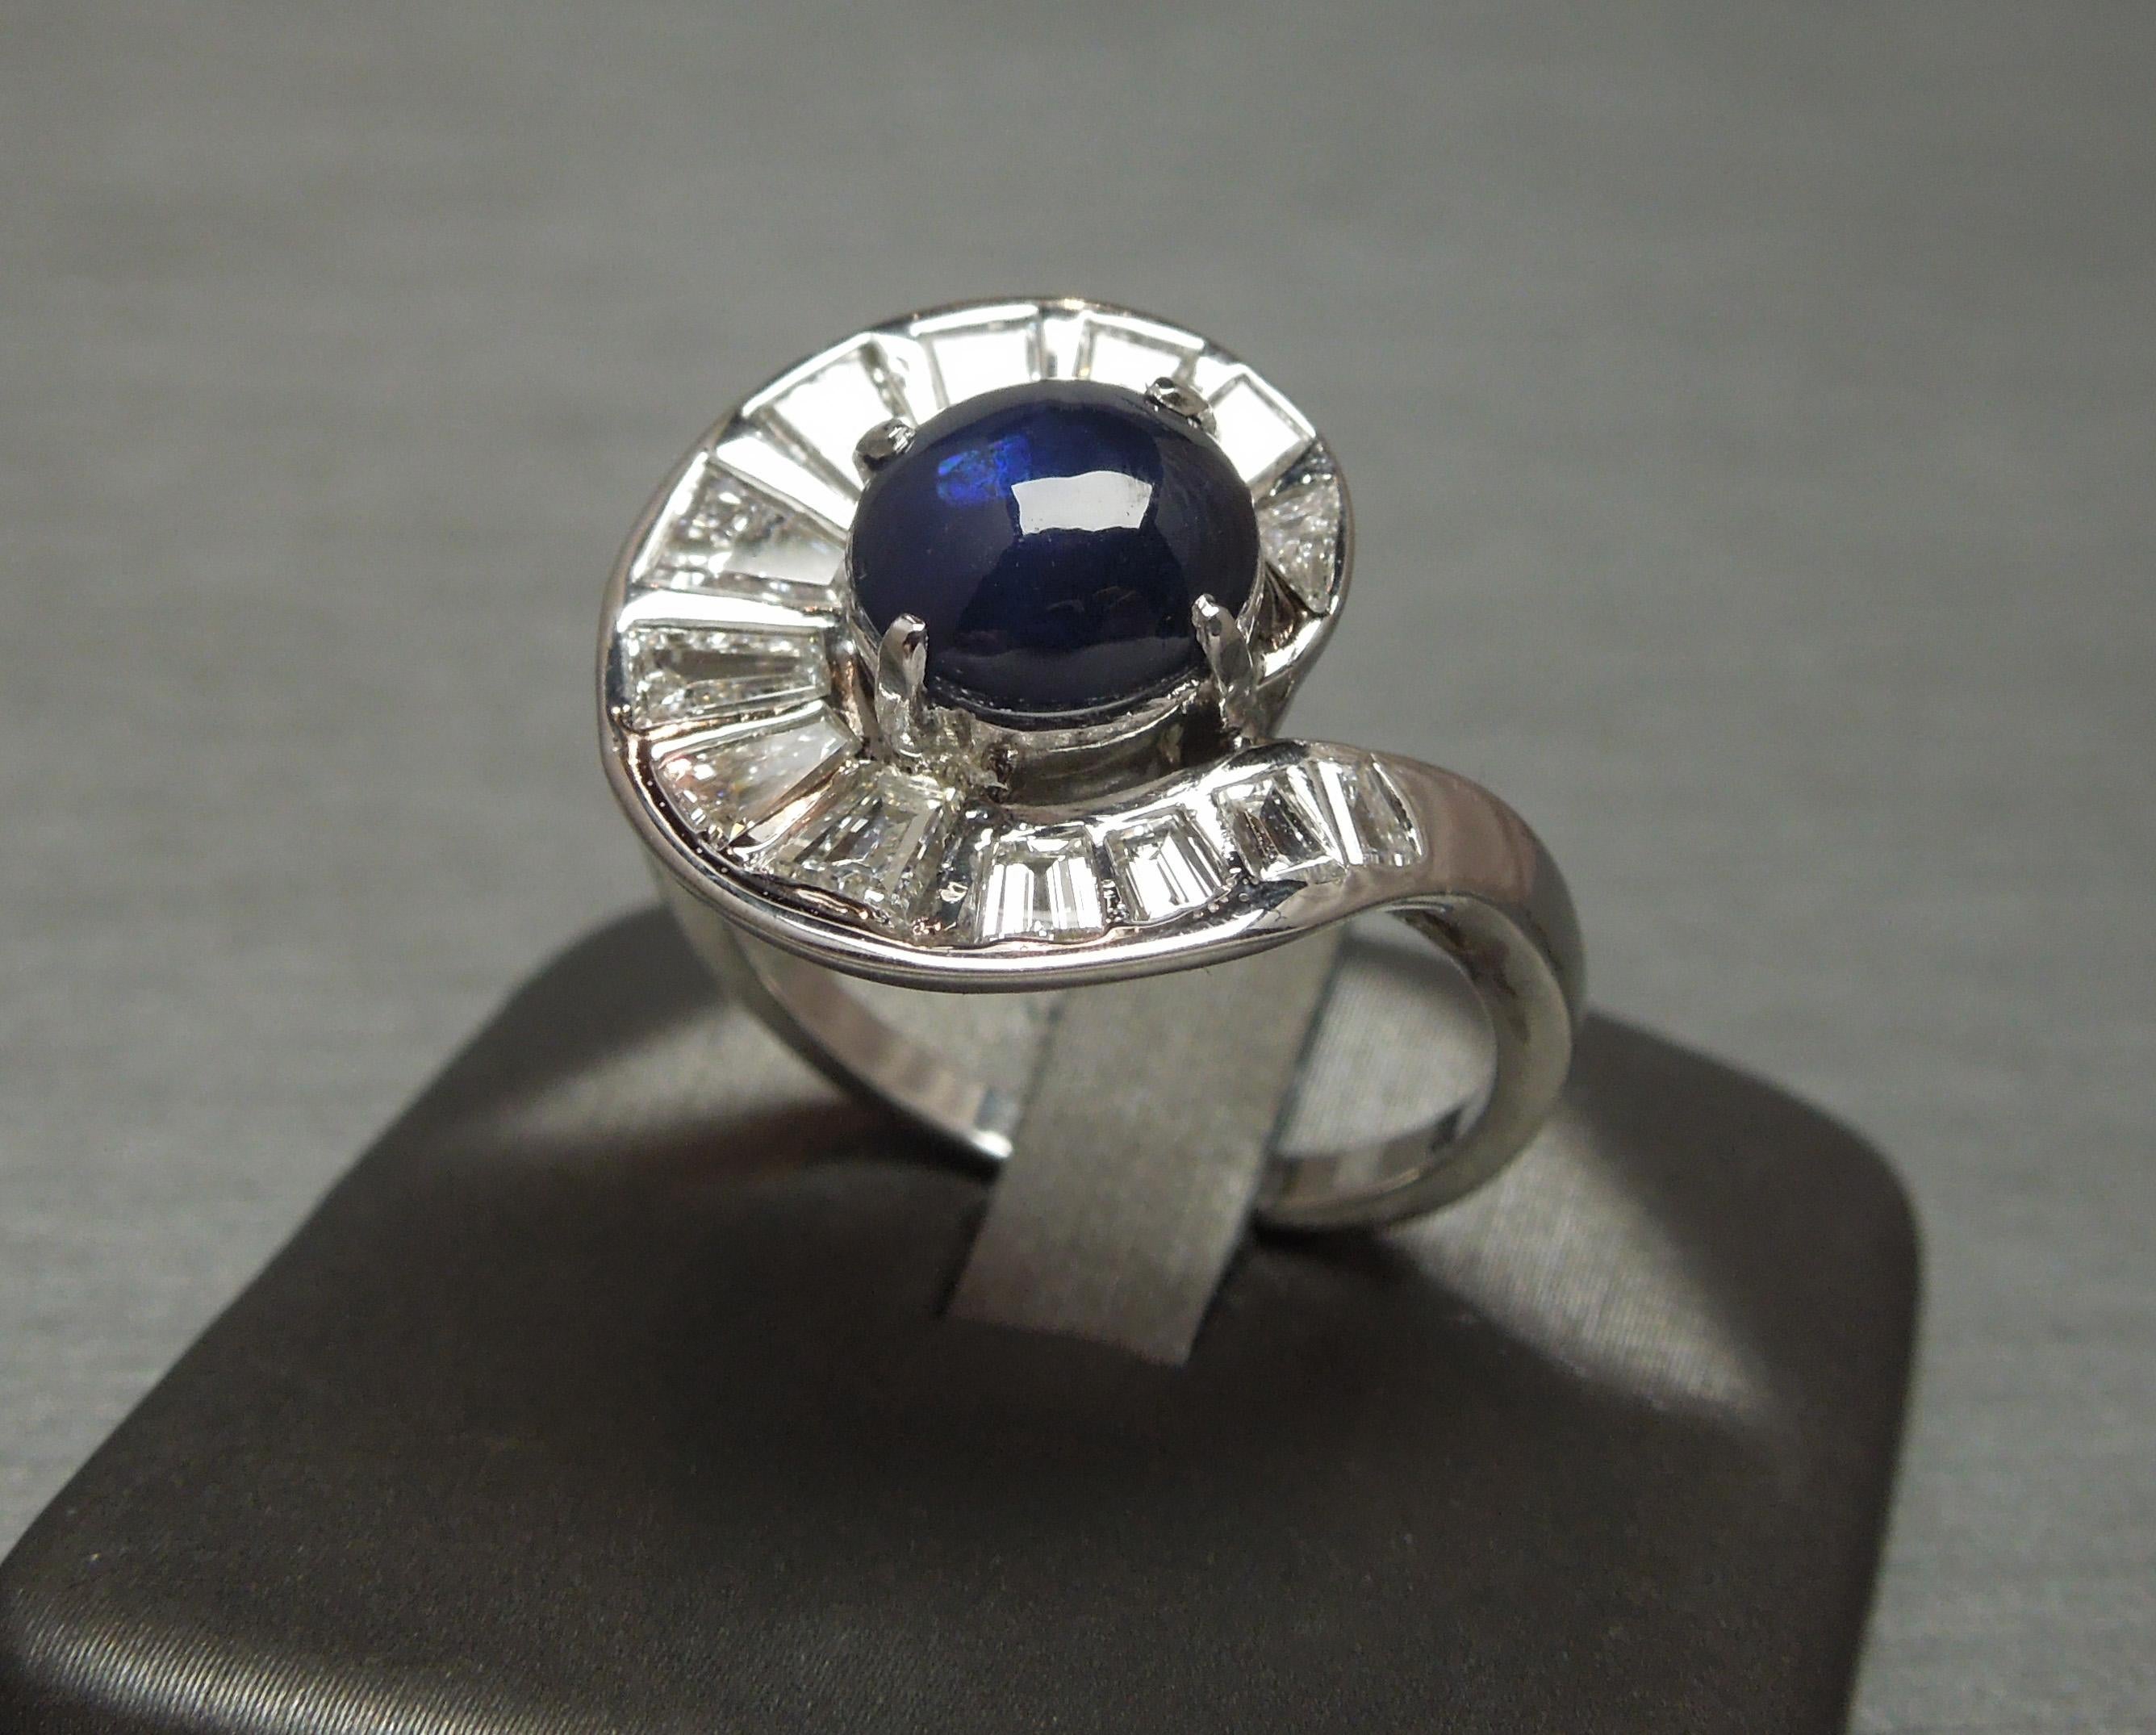 Art Deco Midcentury 2.57 Carat Sapphire Piano Key Cocktail Ring For Sale